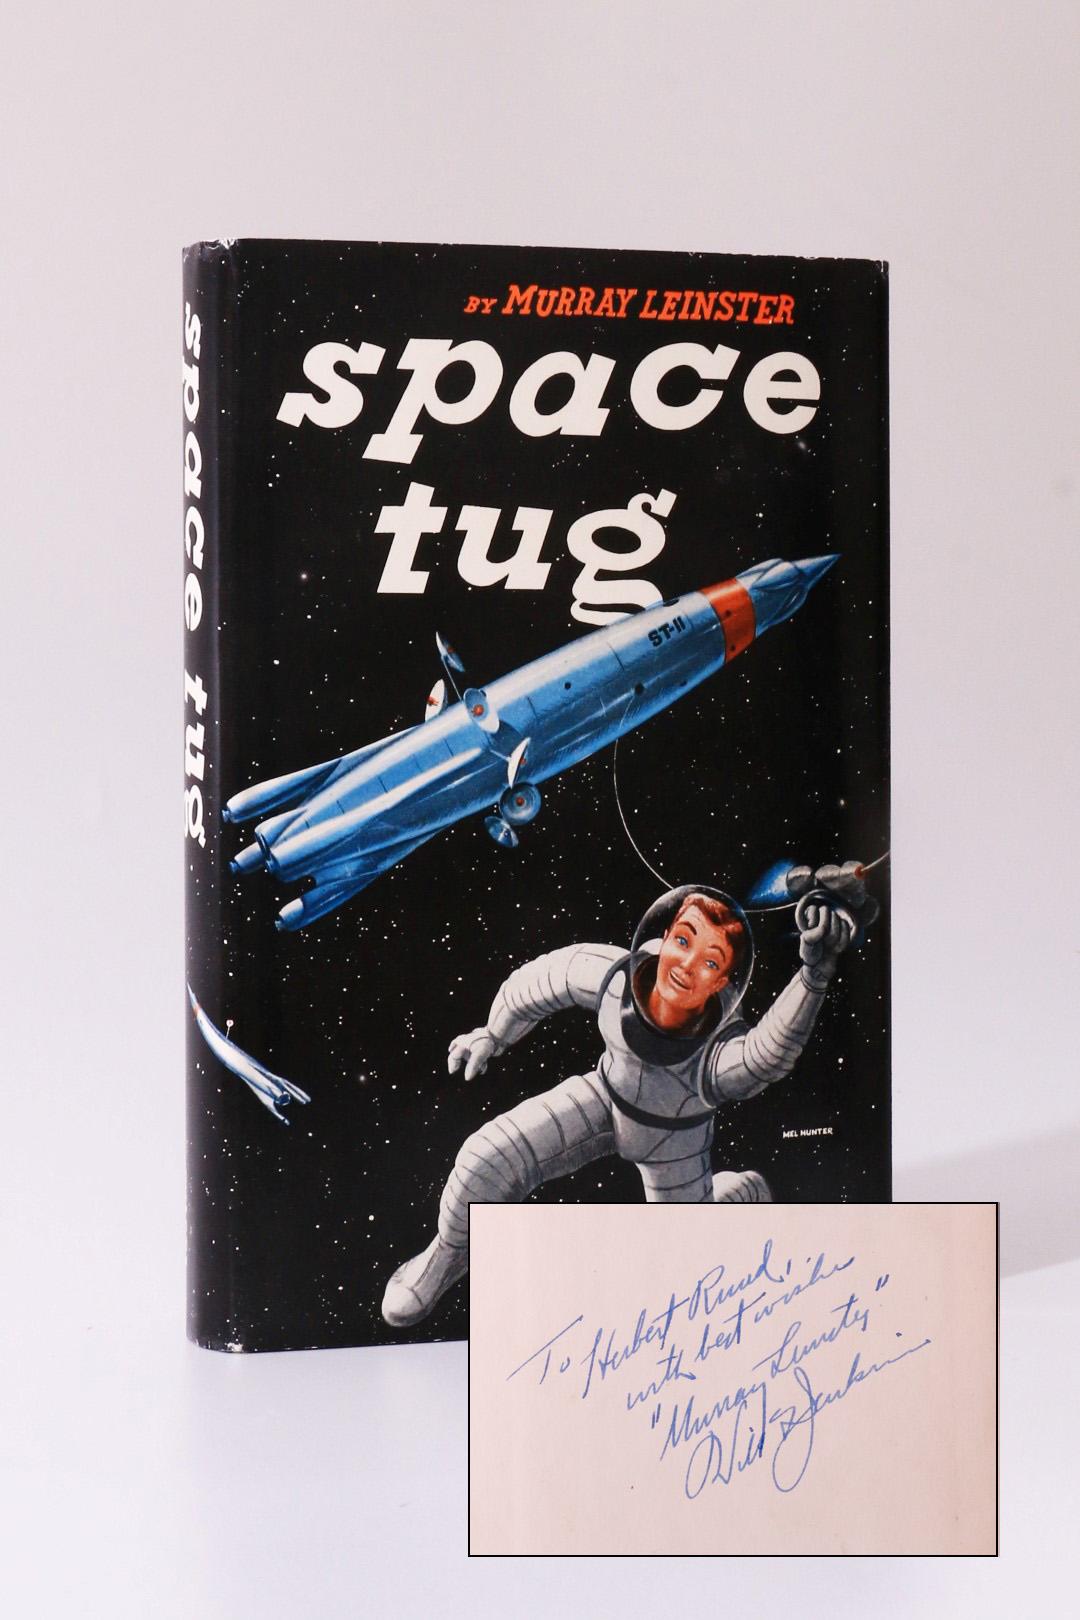 Murray Leinster - Space Tug - Shasta, 1953, Signed First Edition.